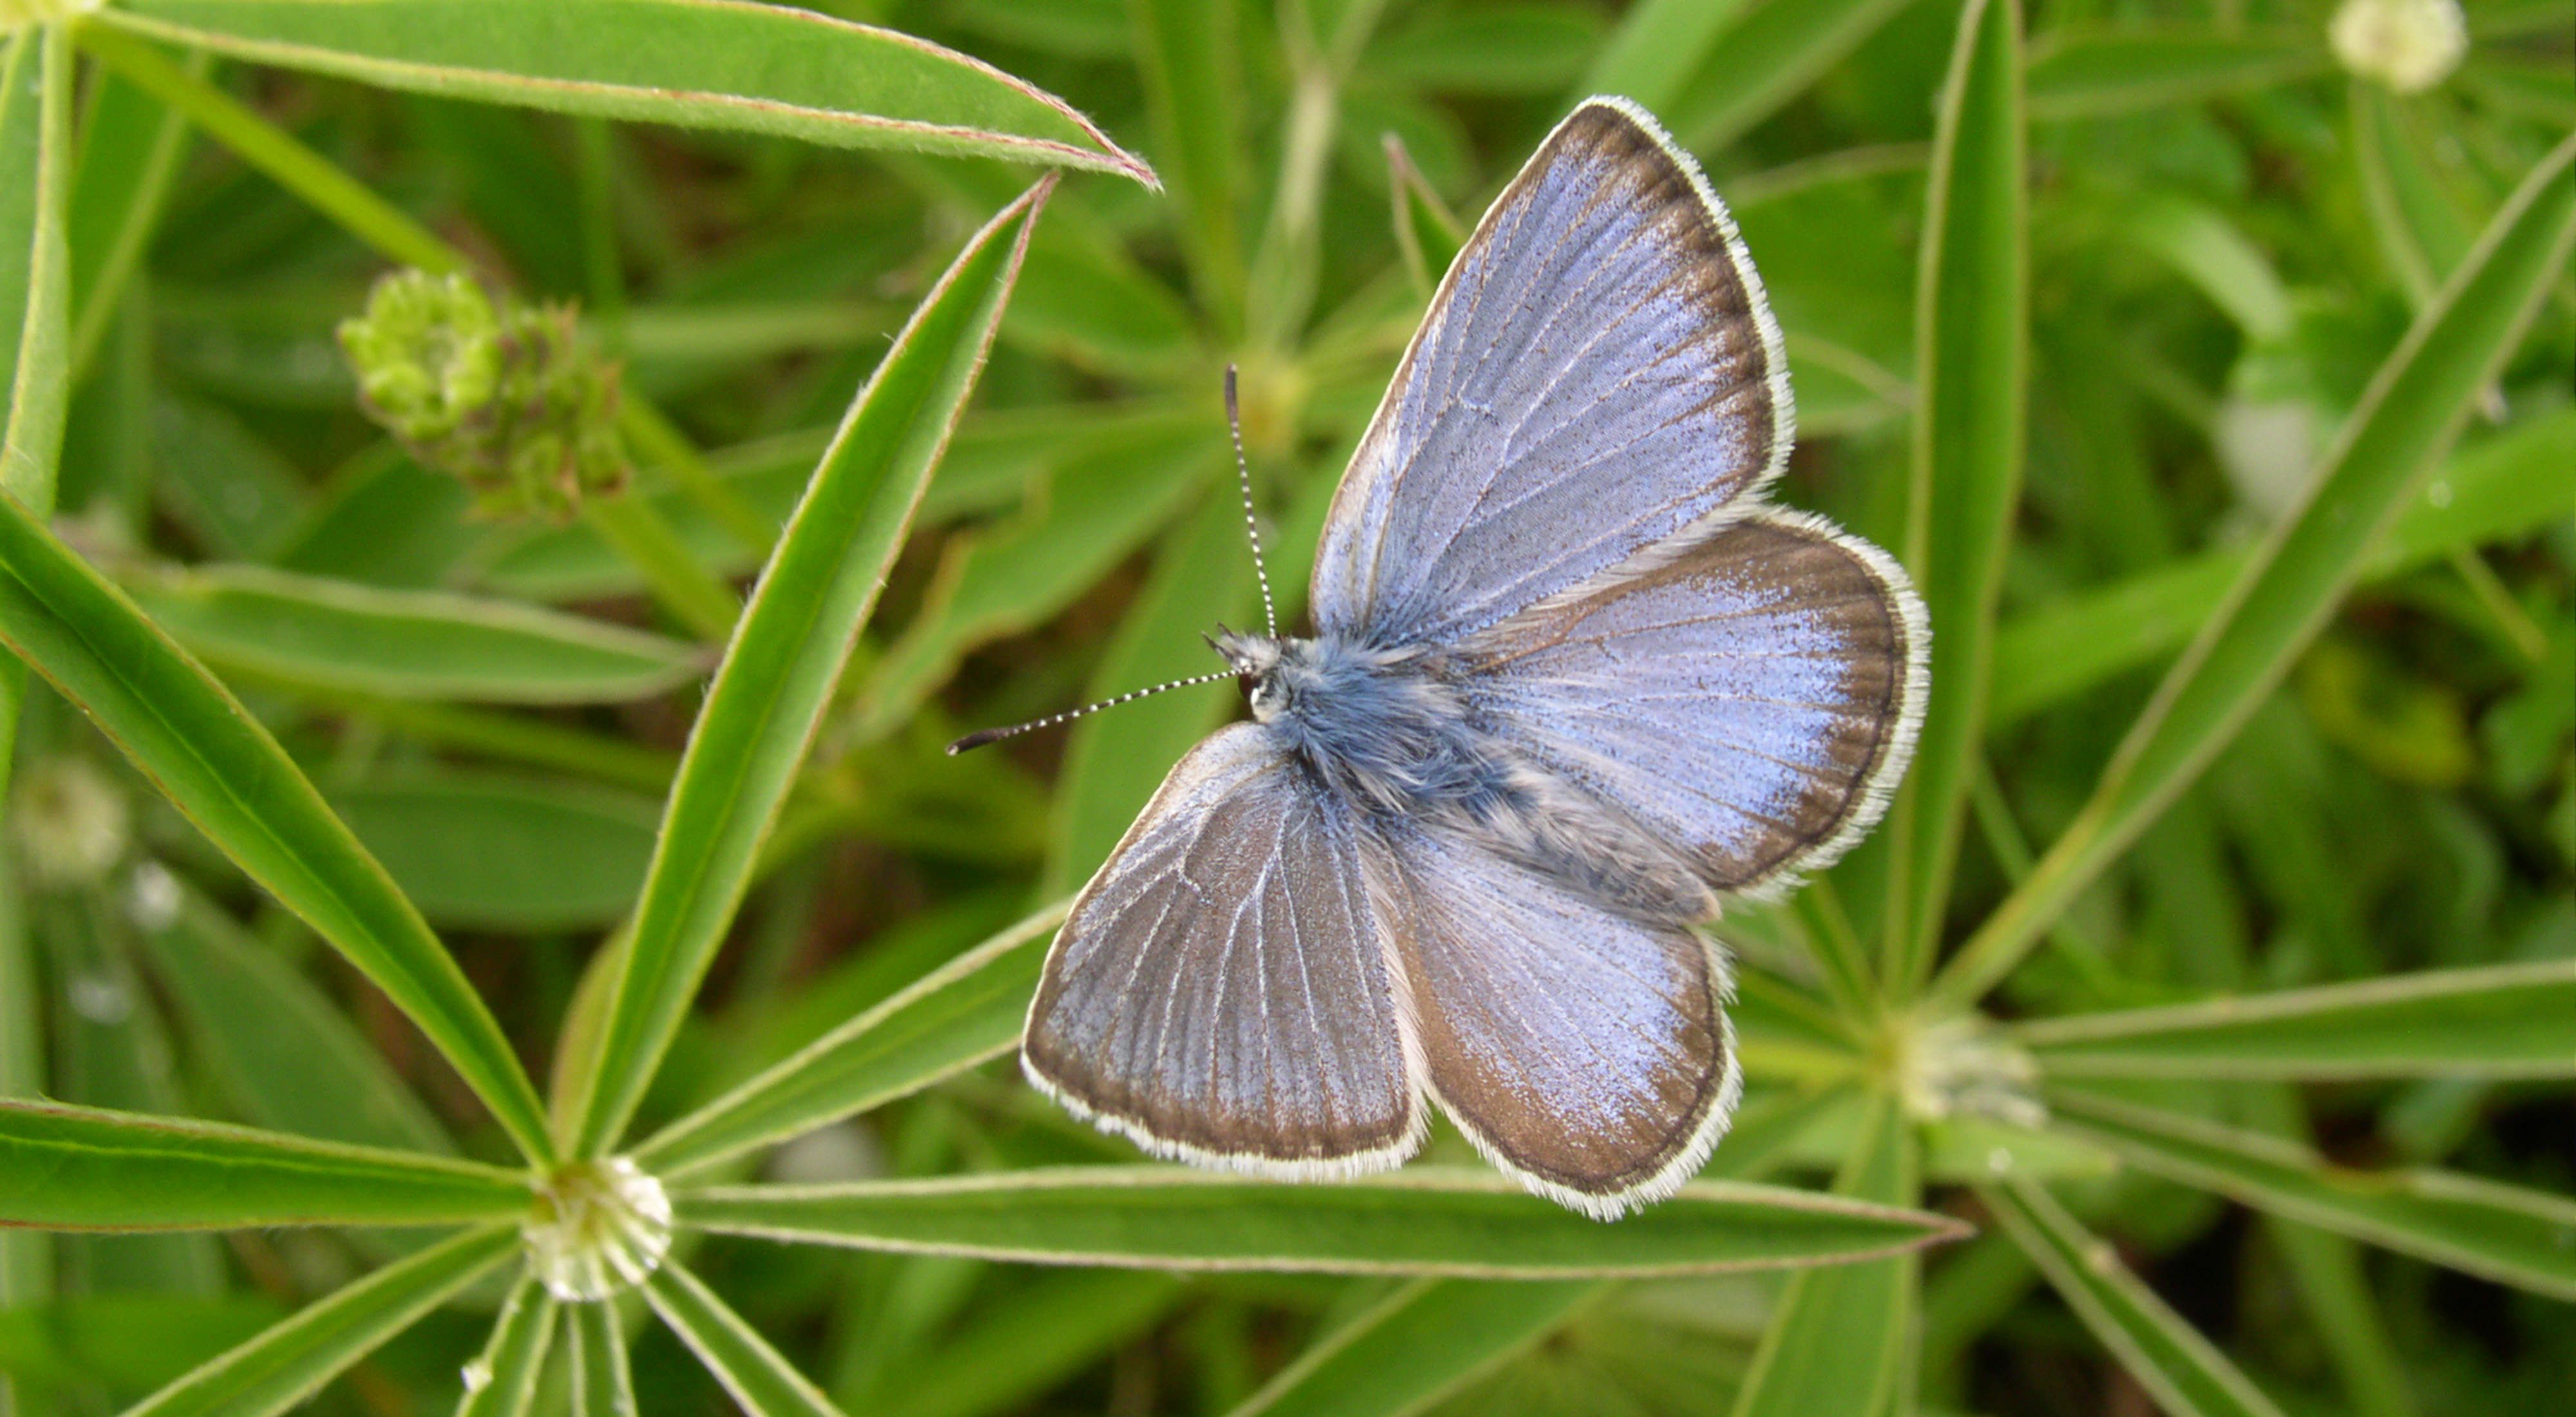 A small blue butterfly with gray along the edges of its wings, sitting on green foliage.